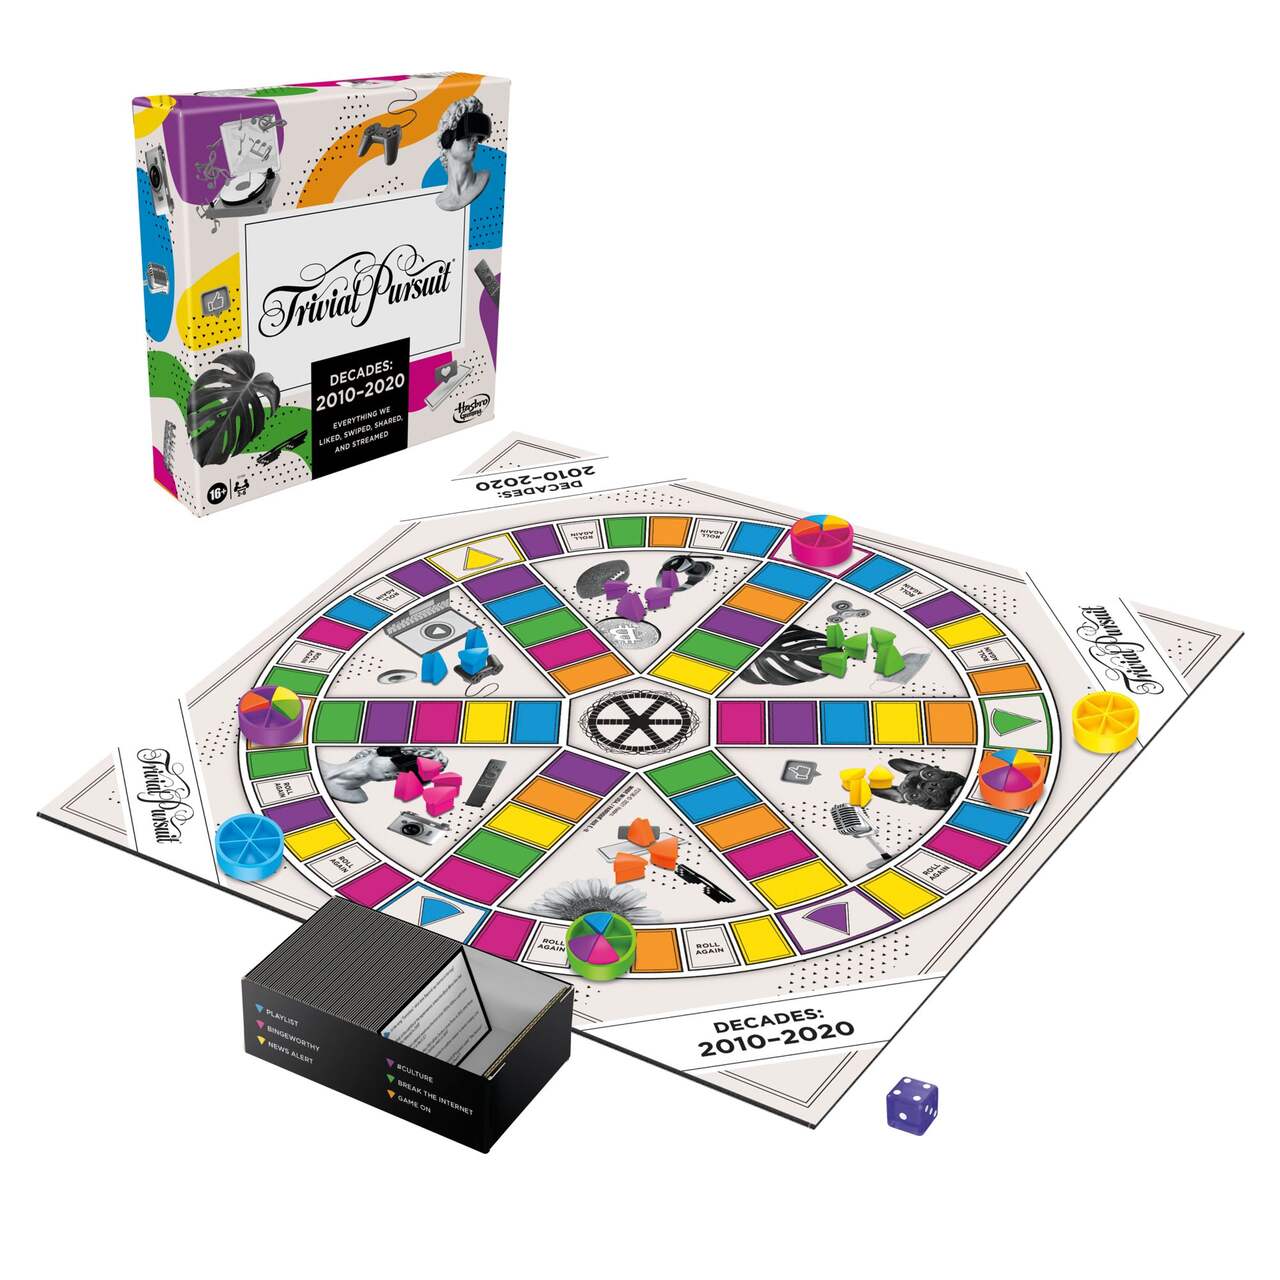 Trivial Pursuit Decades 2010 to 2020 Board Game - English Edition, Ages 16+